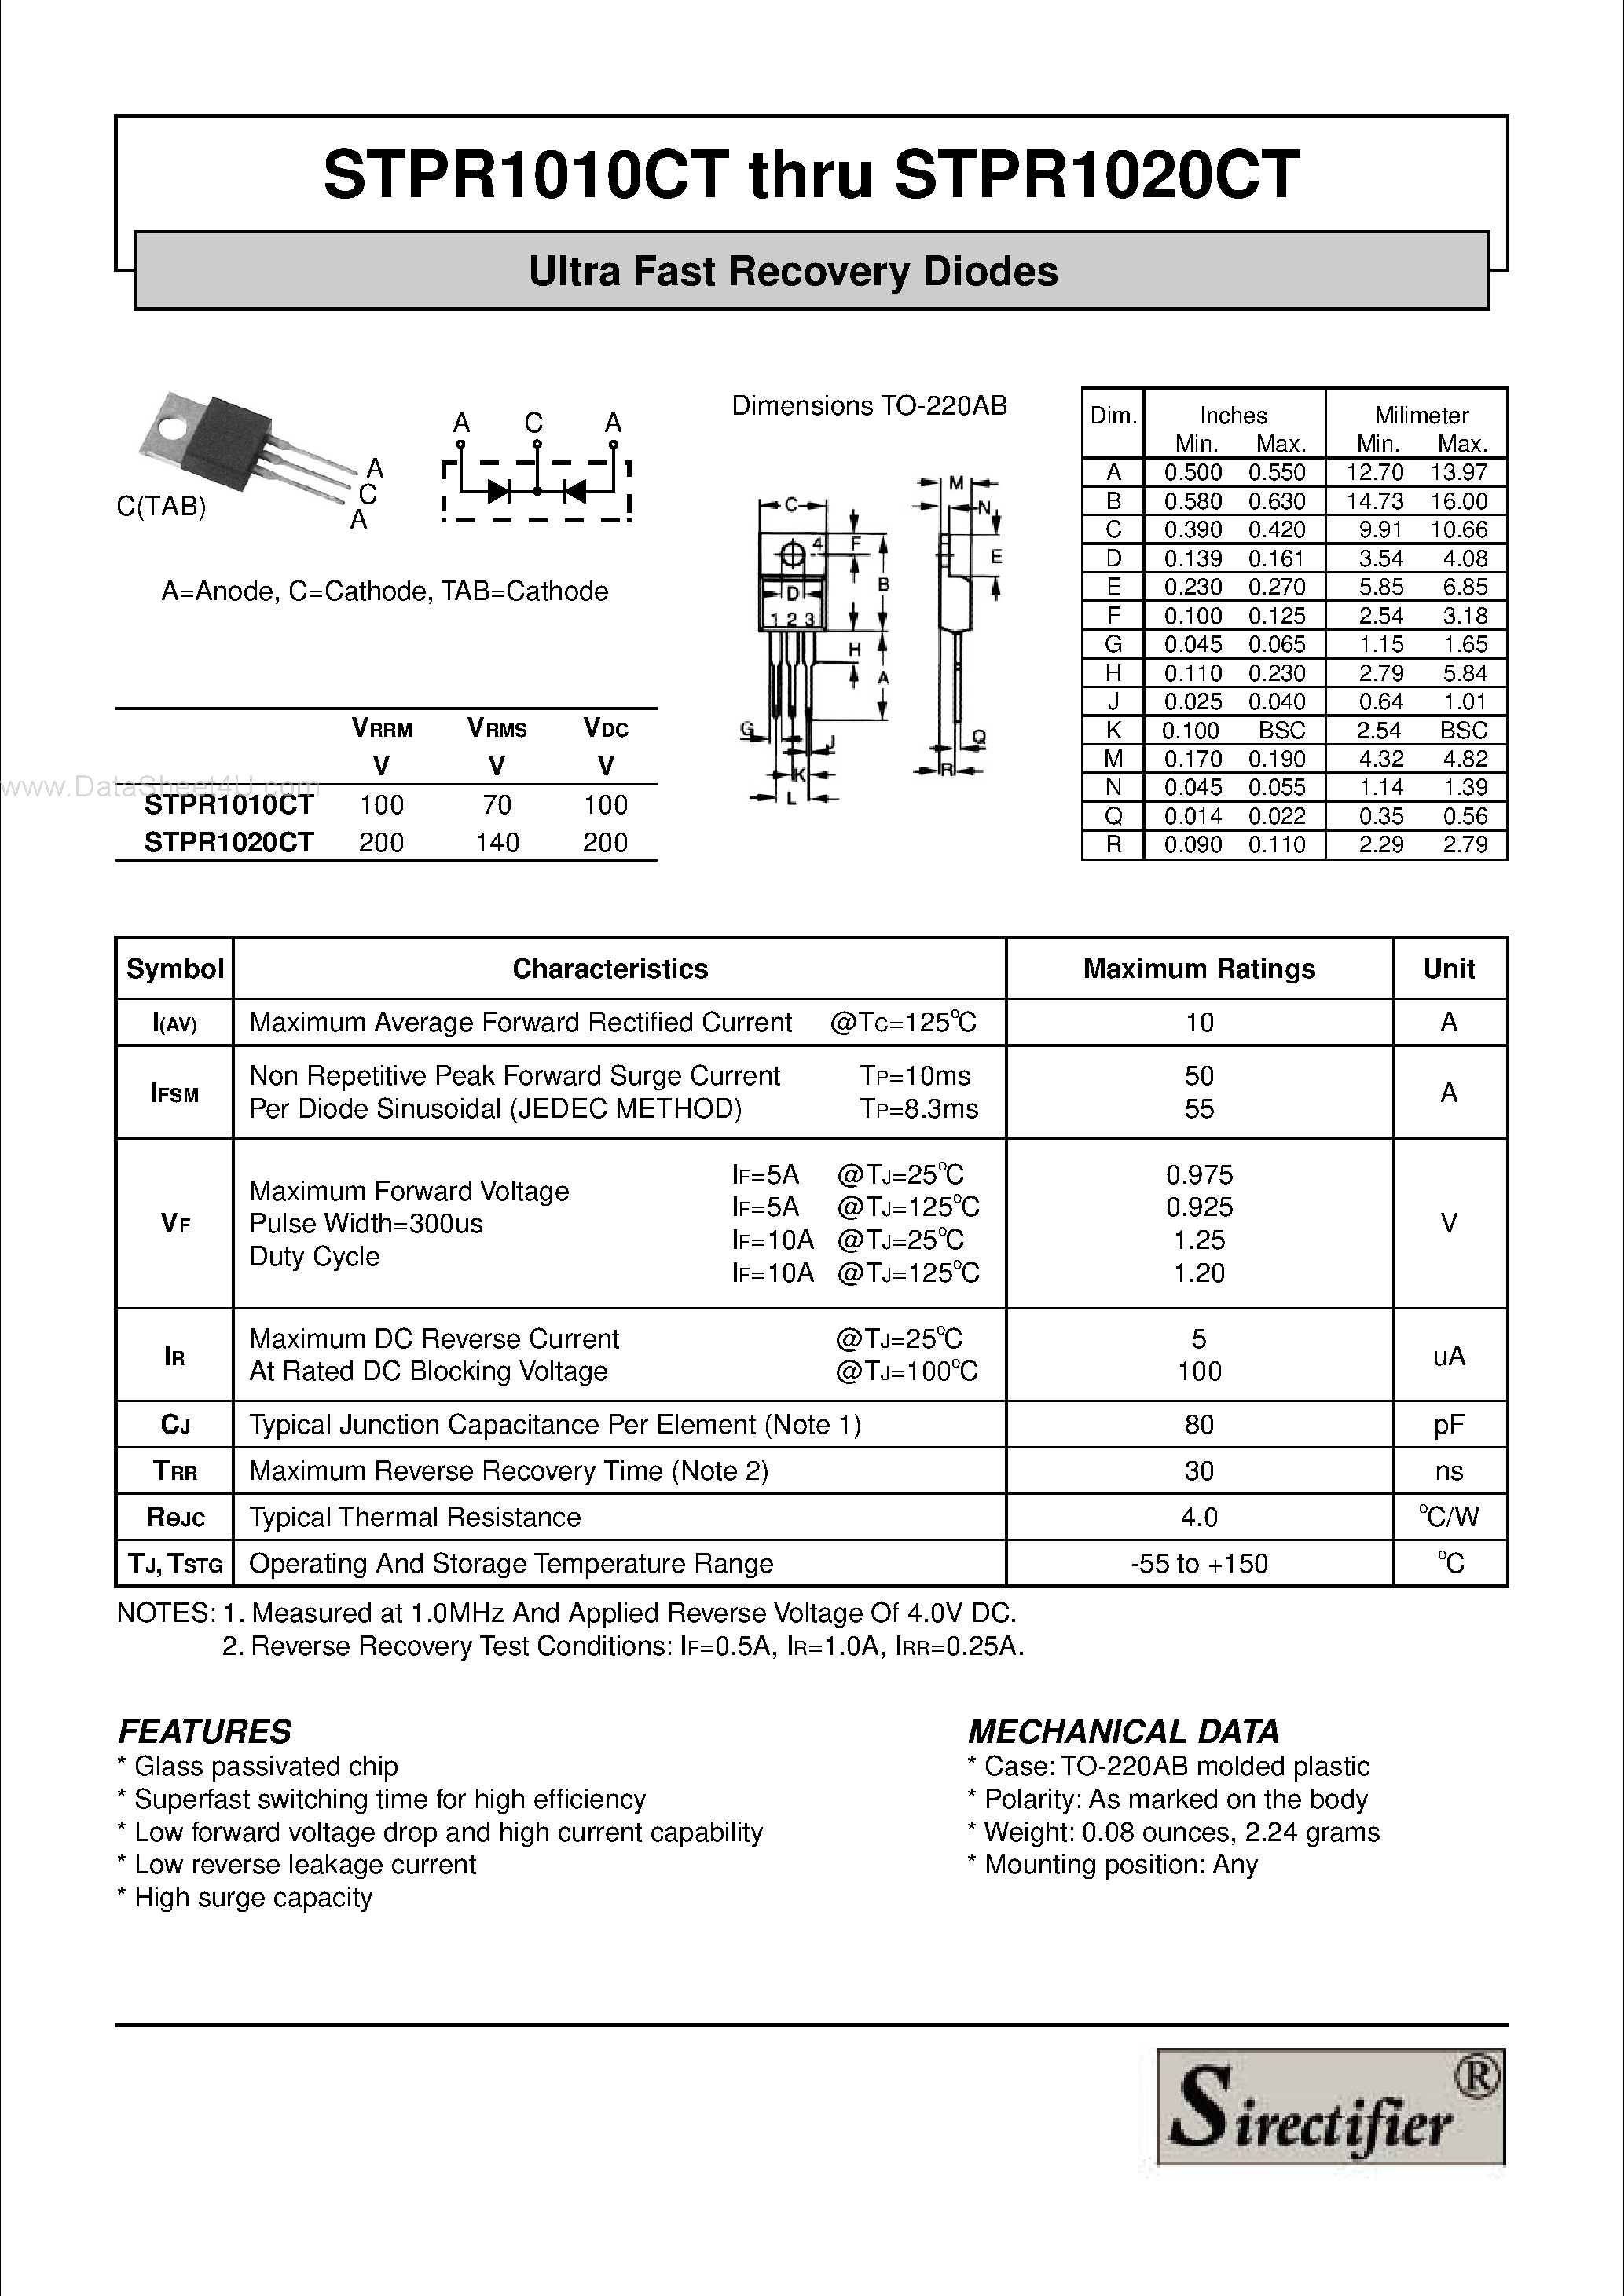 Datasheet STPR1010CT - (STPR1010CT - STPR1020CT) Ultra Fast Recovery Diodes page 1